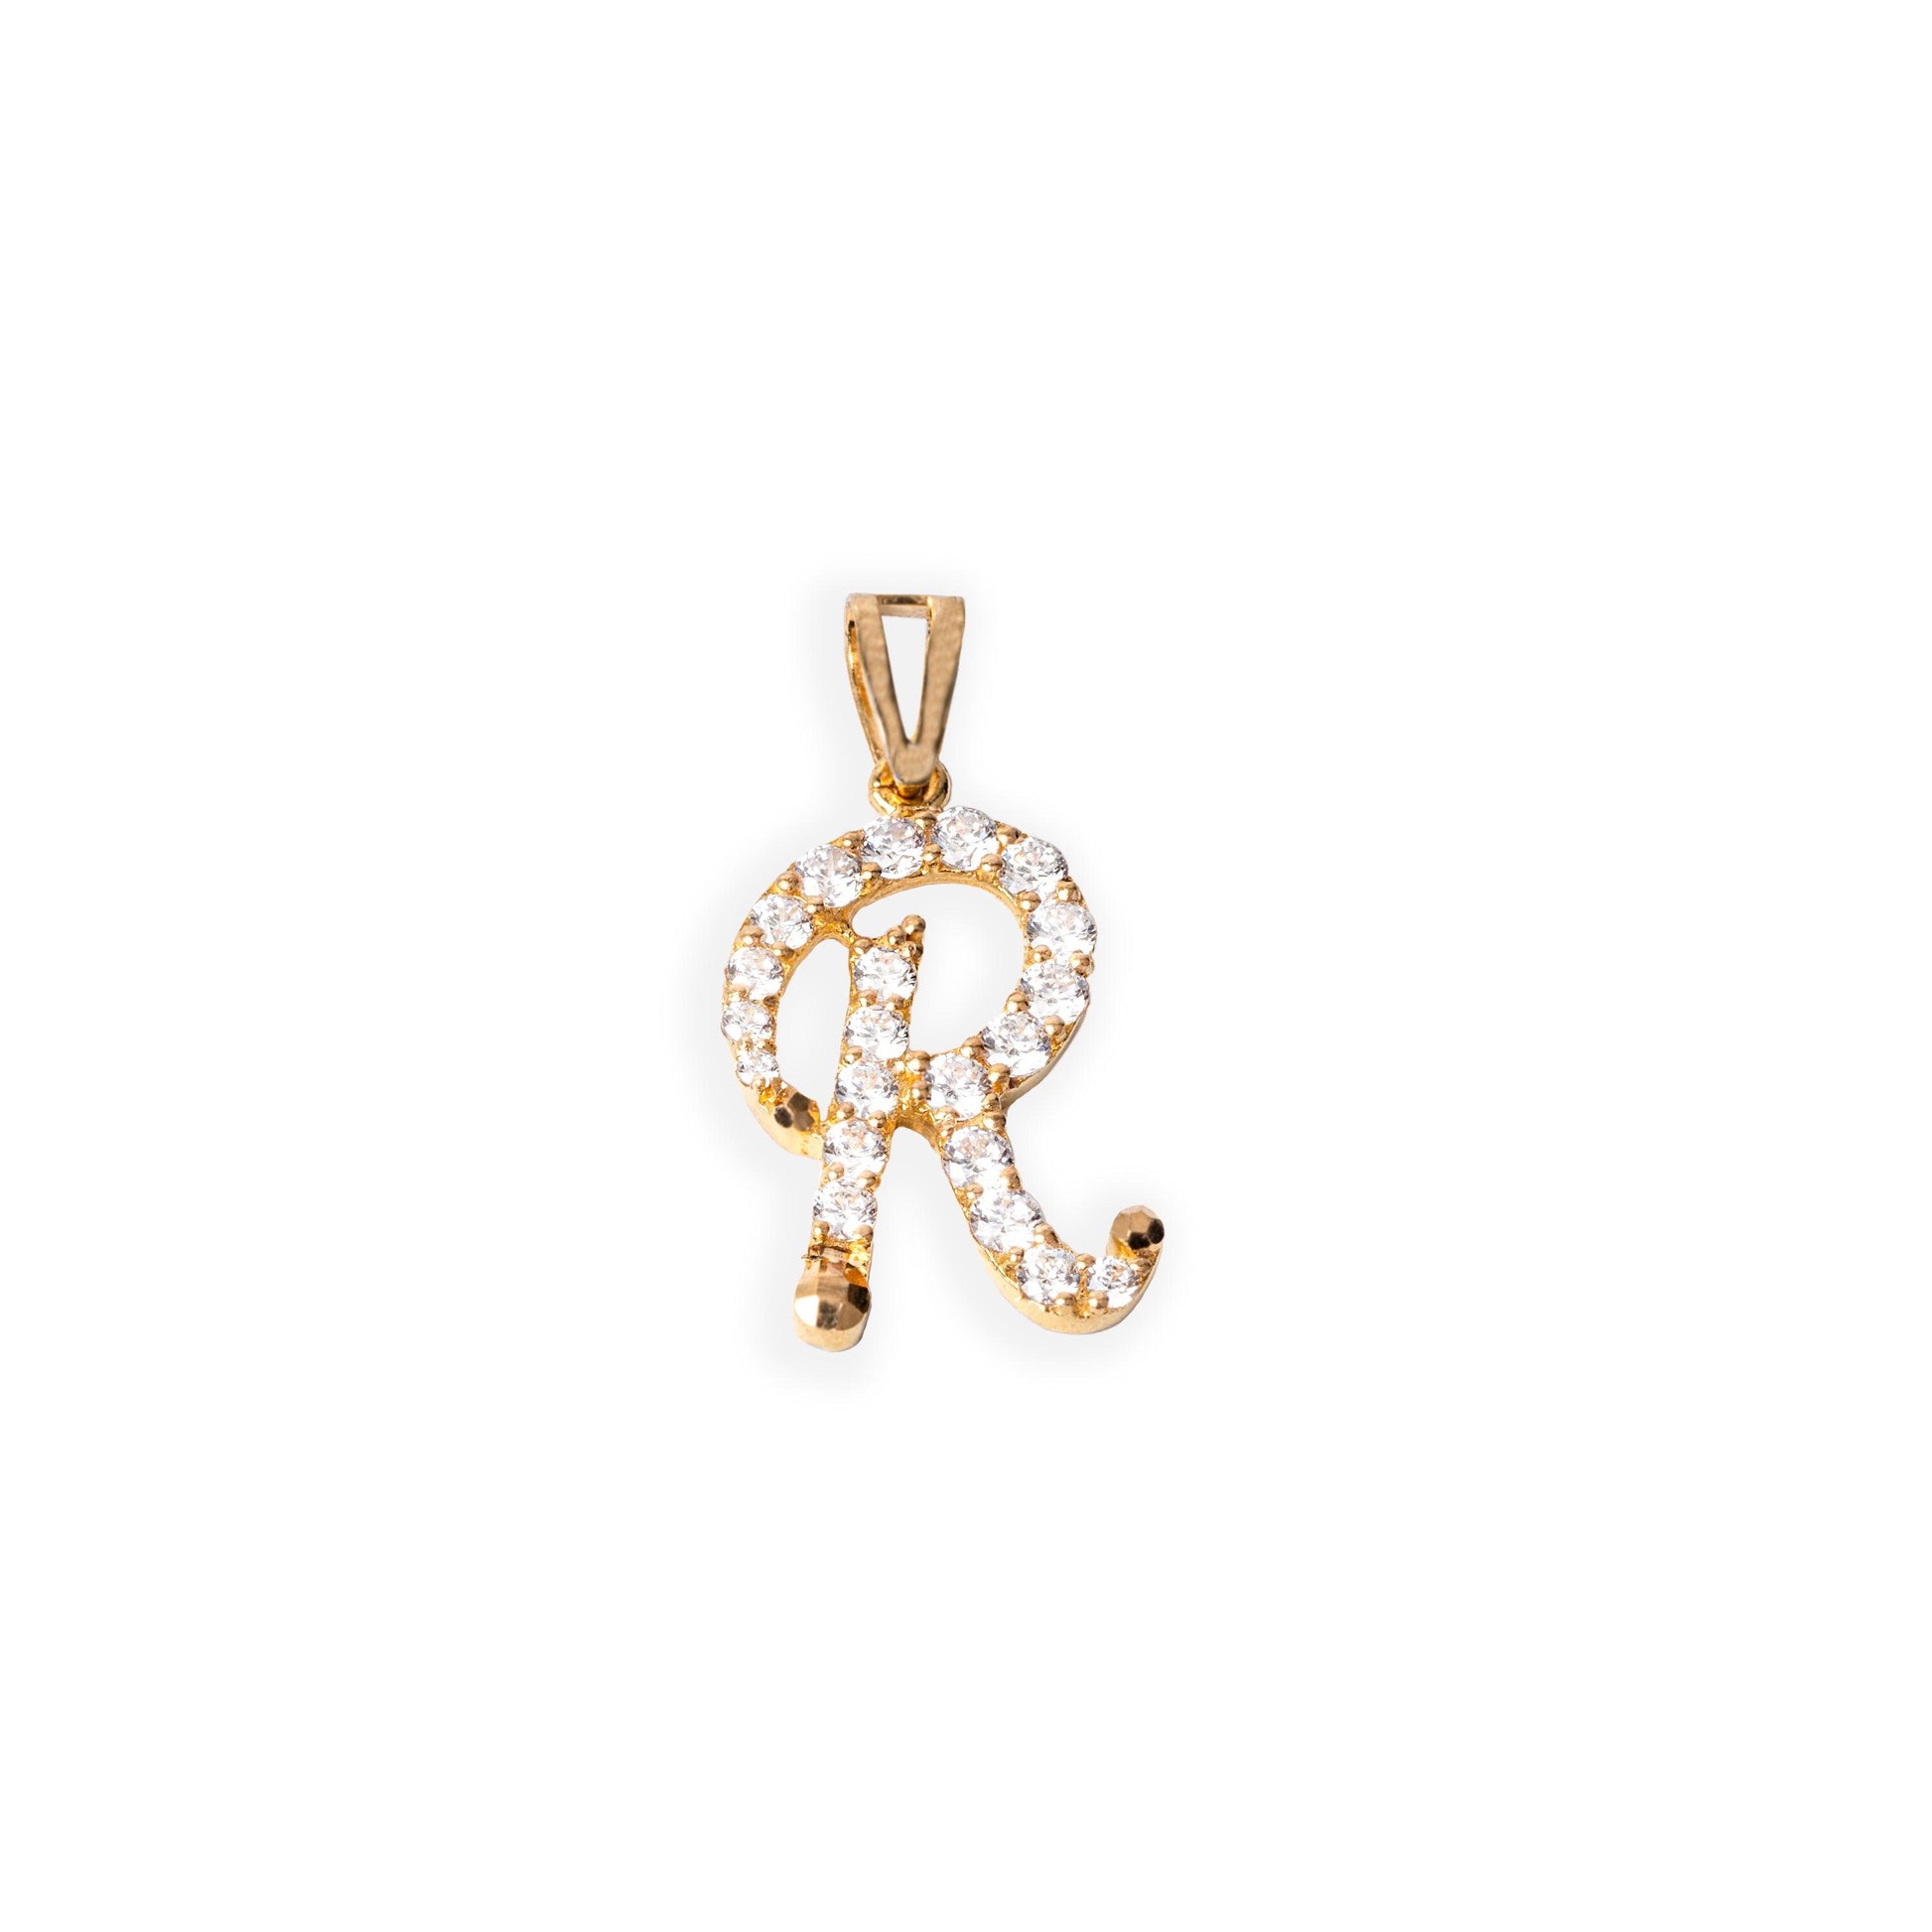 'R' 22ct Gold Initial Pendant with Cubic Zirconia Stones P-7039-R - Minar Jewellers